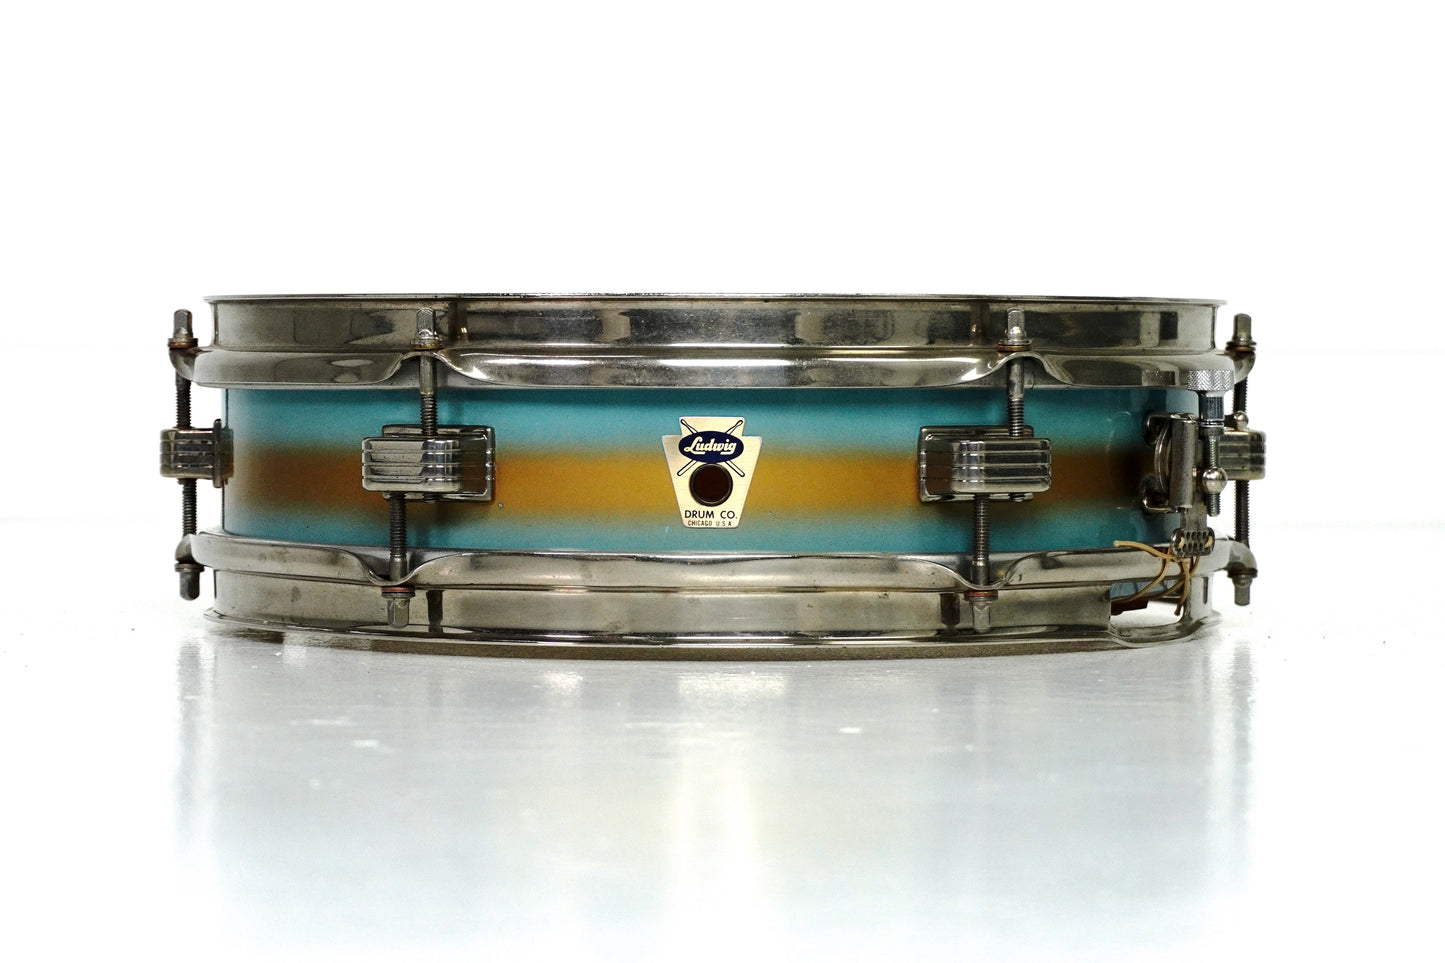 Ludwig 13” x 3” Jazz-Combo Piccolo Snare in Turquoise/Gold Duco Lacquer